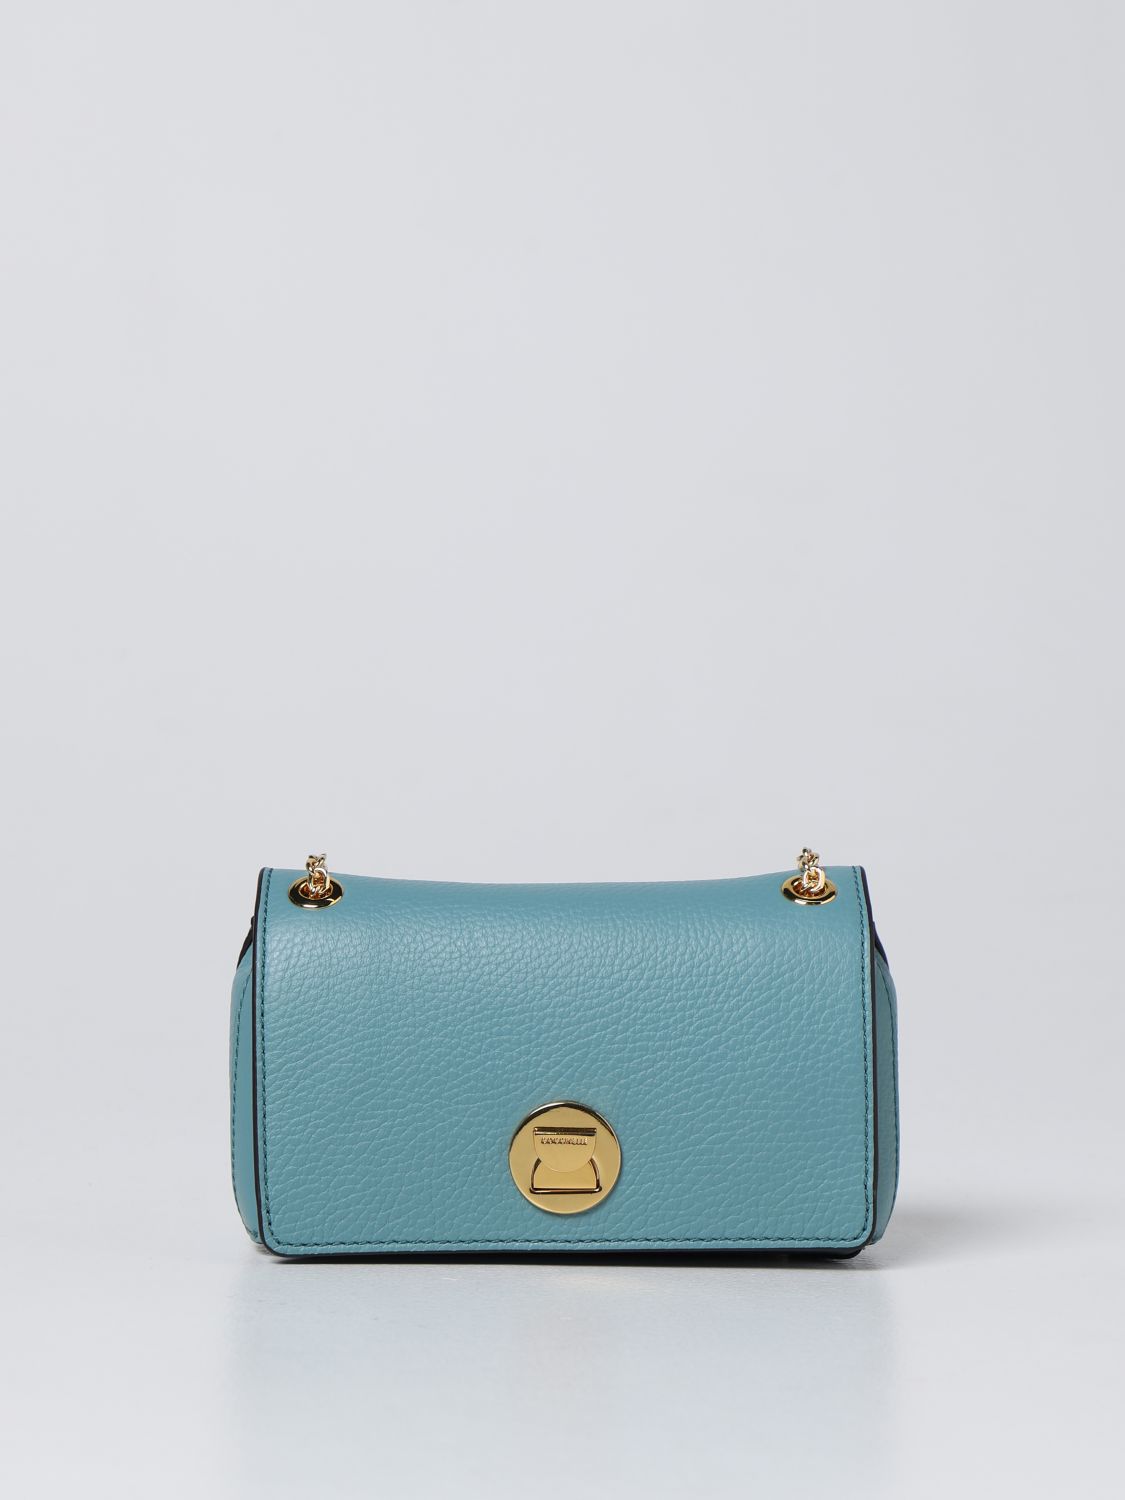 COCCINELLE: Liya bag in textured leather - Gnawed Blue | Coccinelle ...